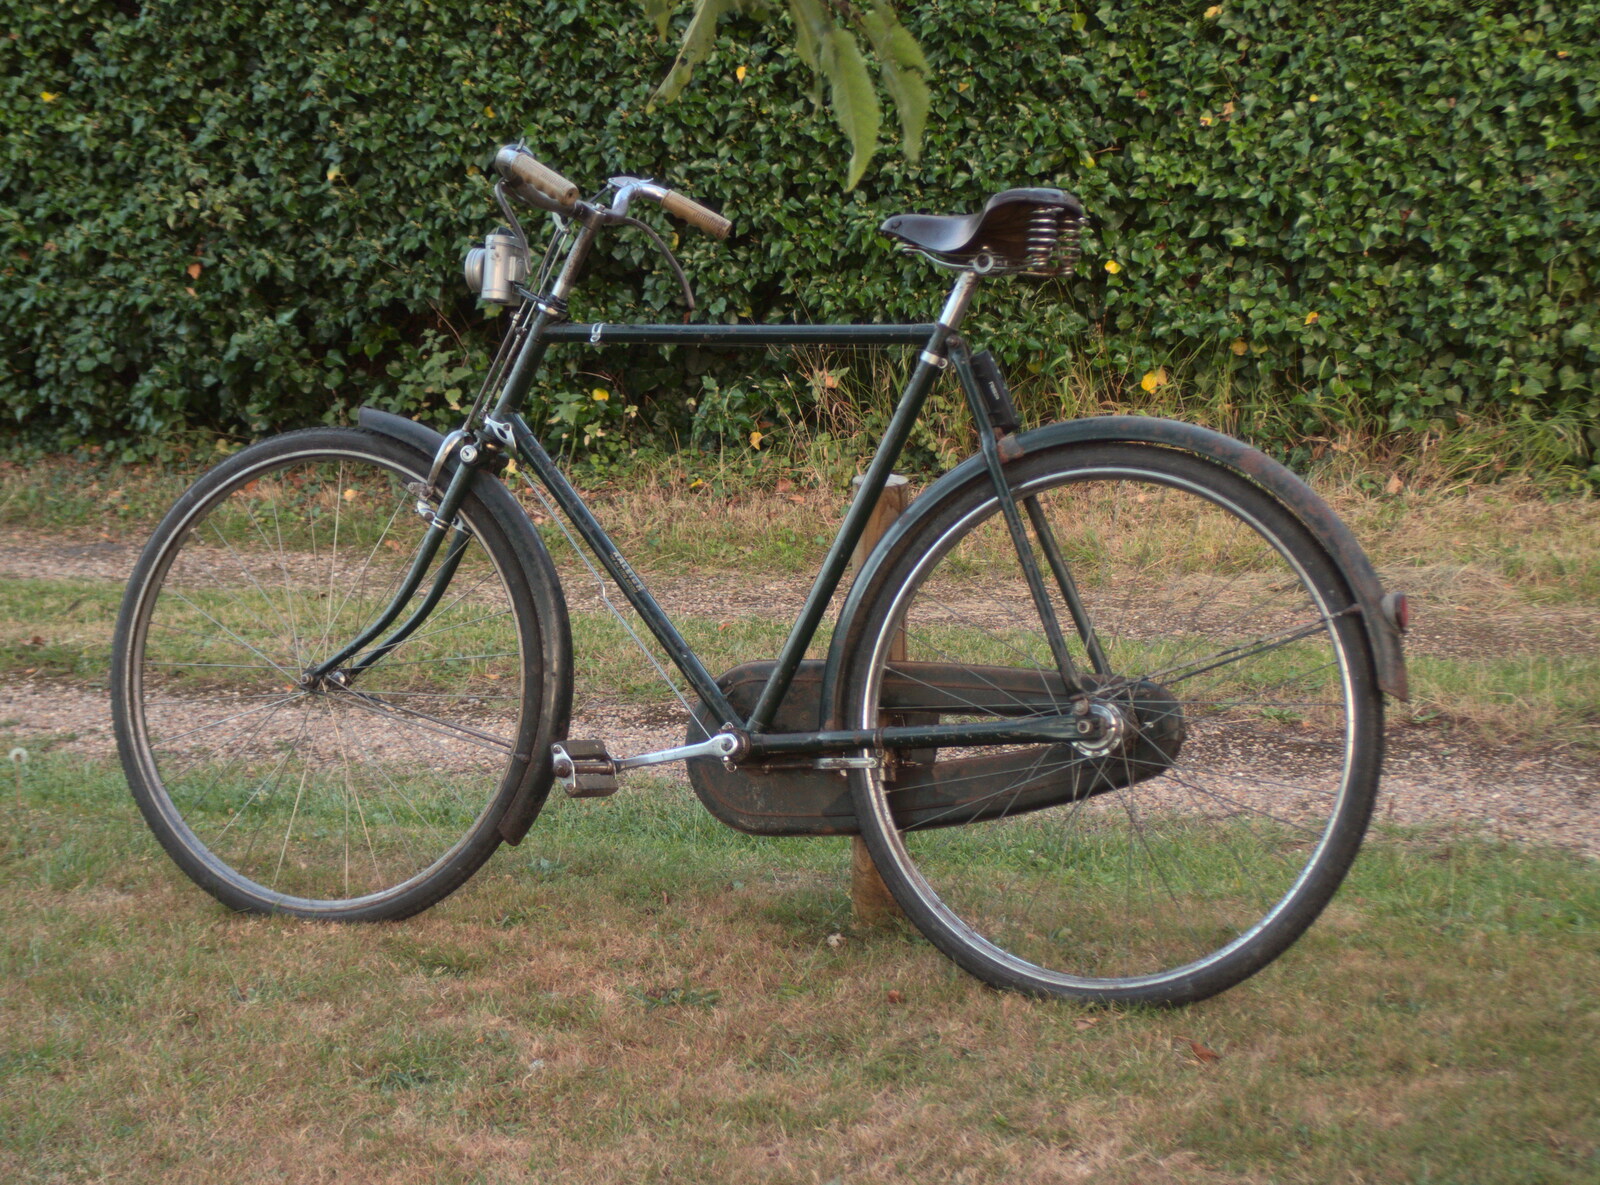 An old bike with proper old front light from The BSCC at The Earl Soham Victoria and Station 119, Eye, Suffolk - 6th August 2020